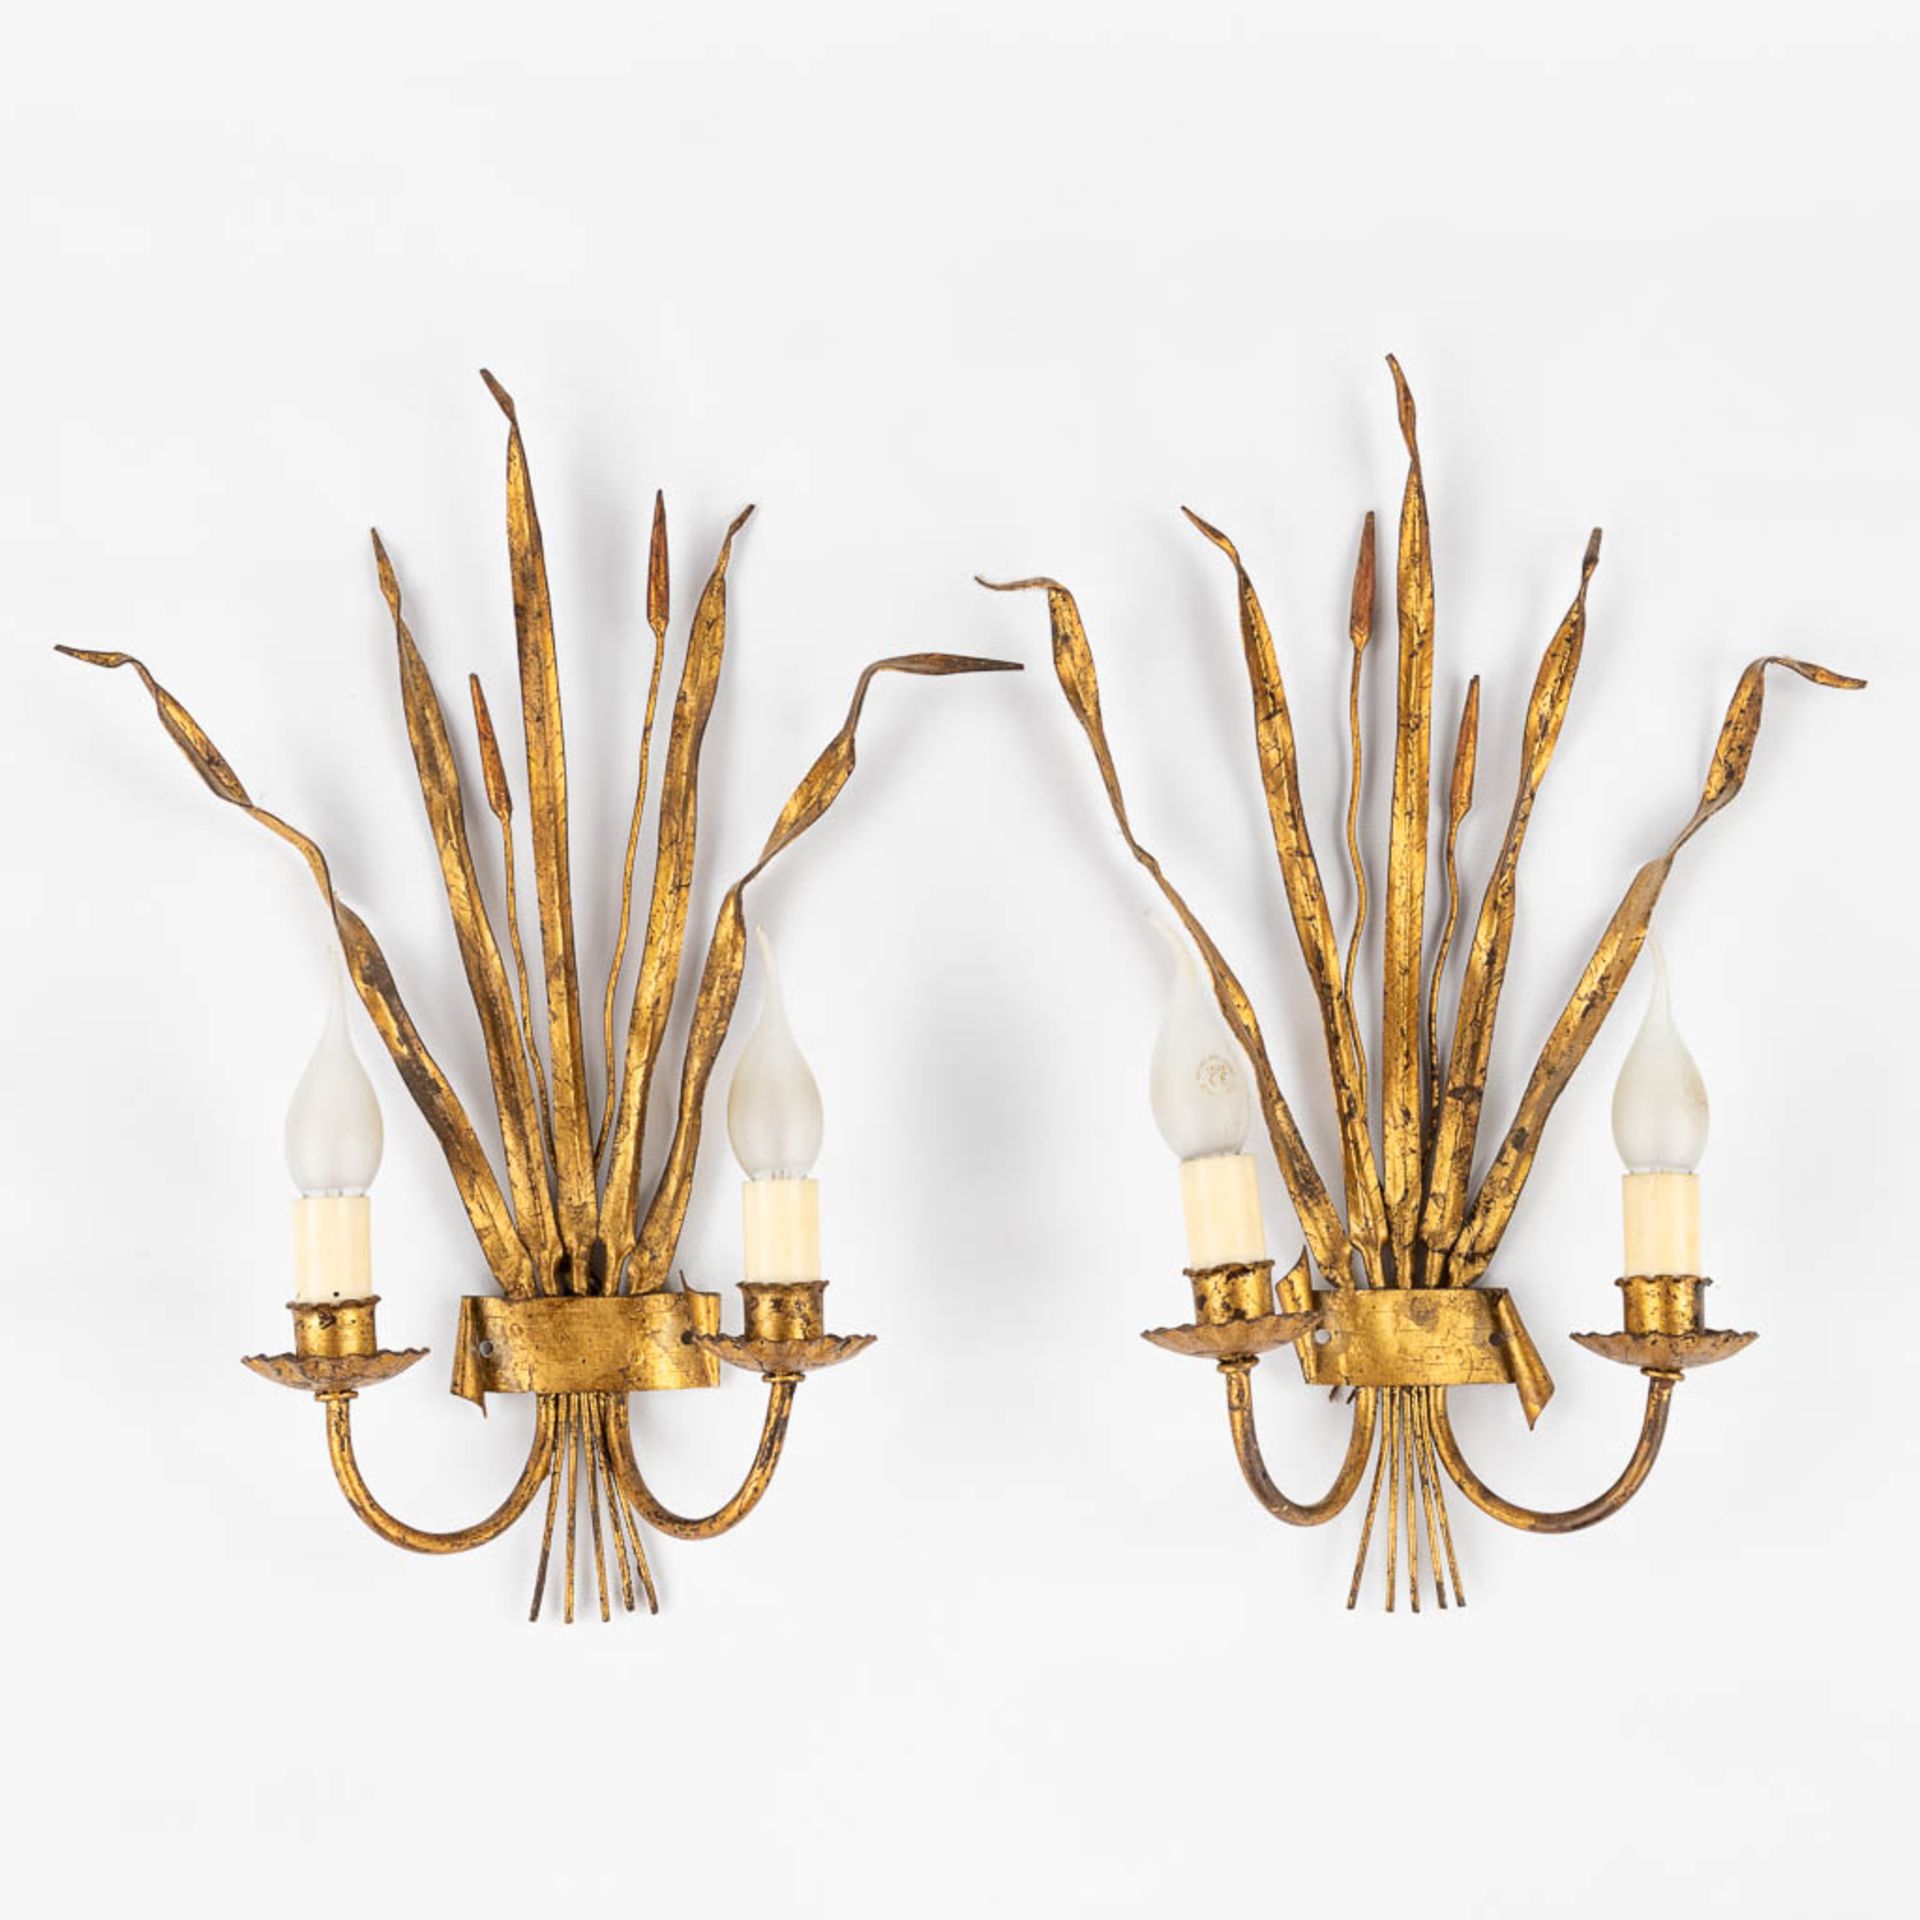 A decorative pair of vintage 'Reeds' wall lamps, gilt metal, Circa 1960. (W:35 x H:48 cm)